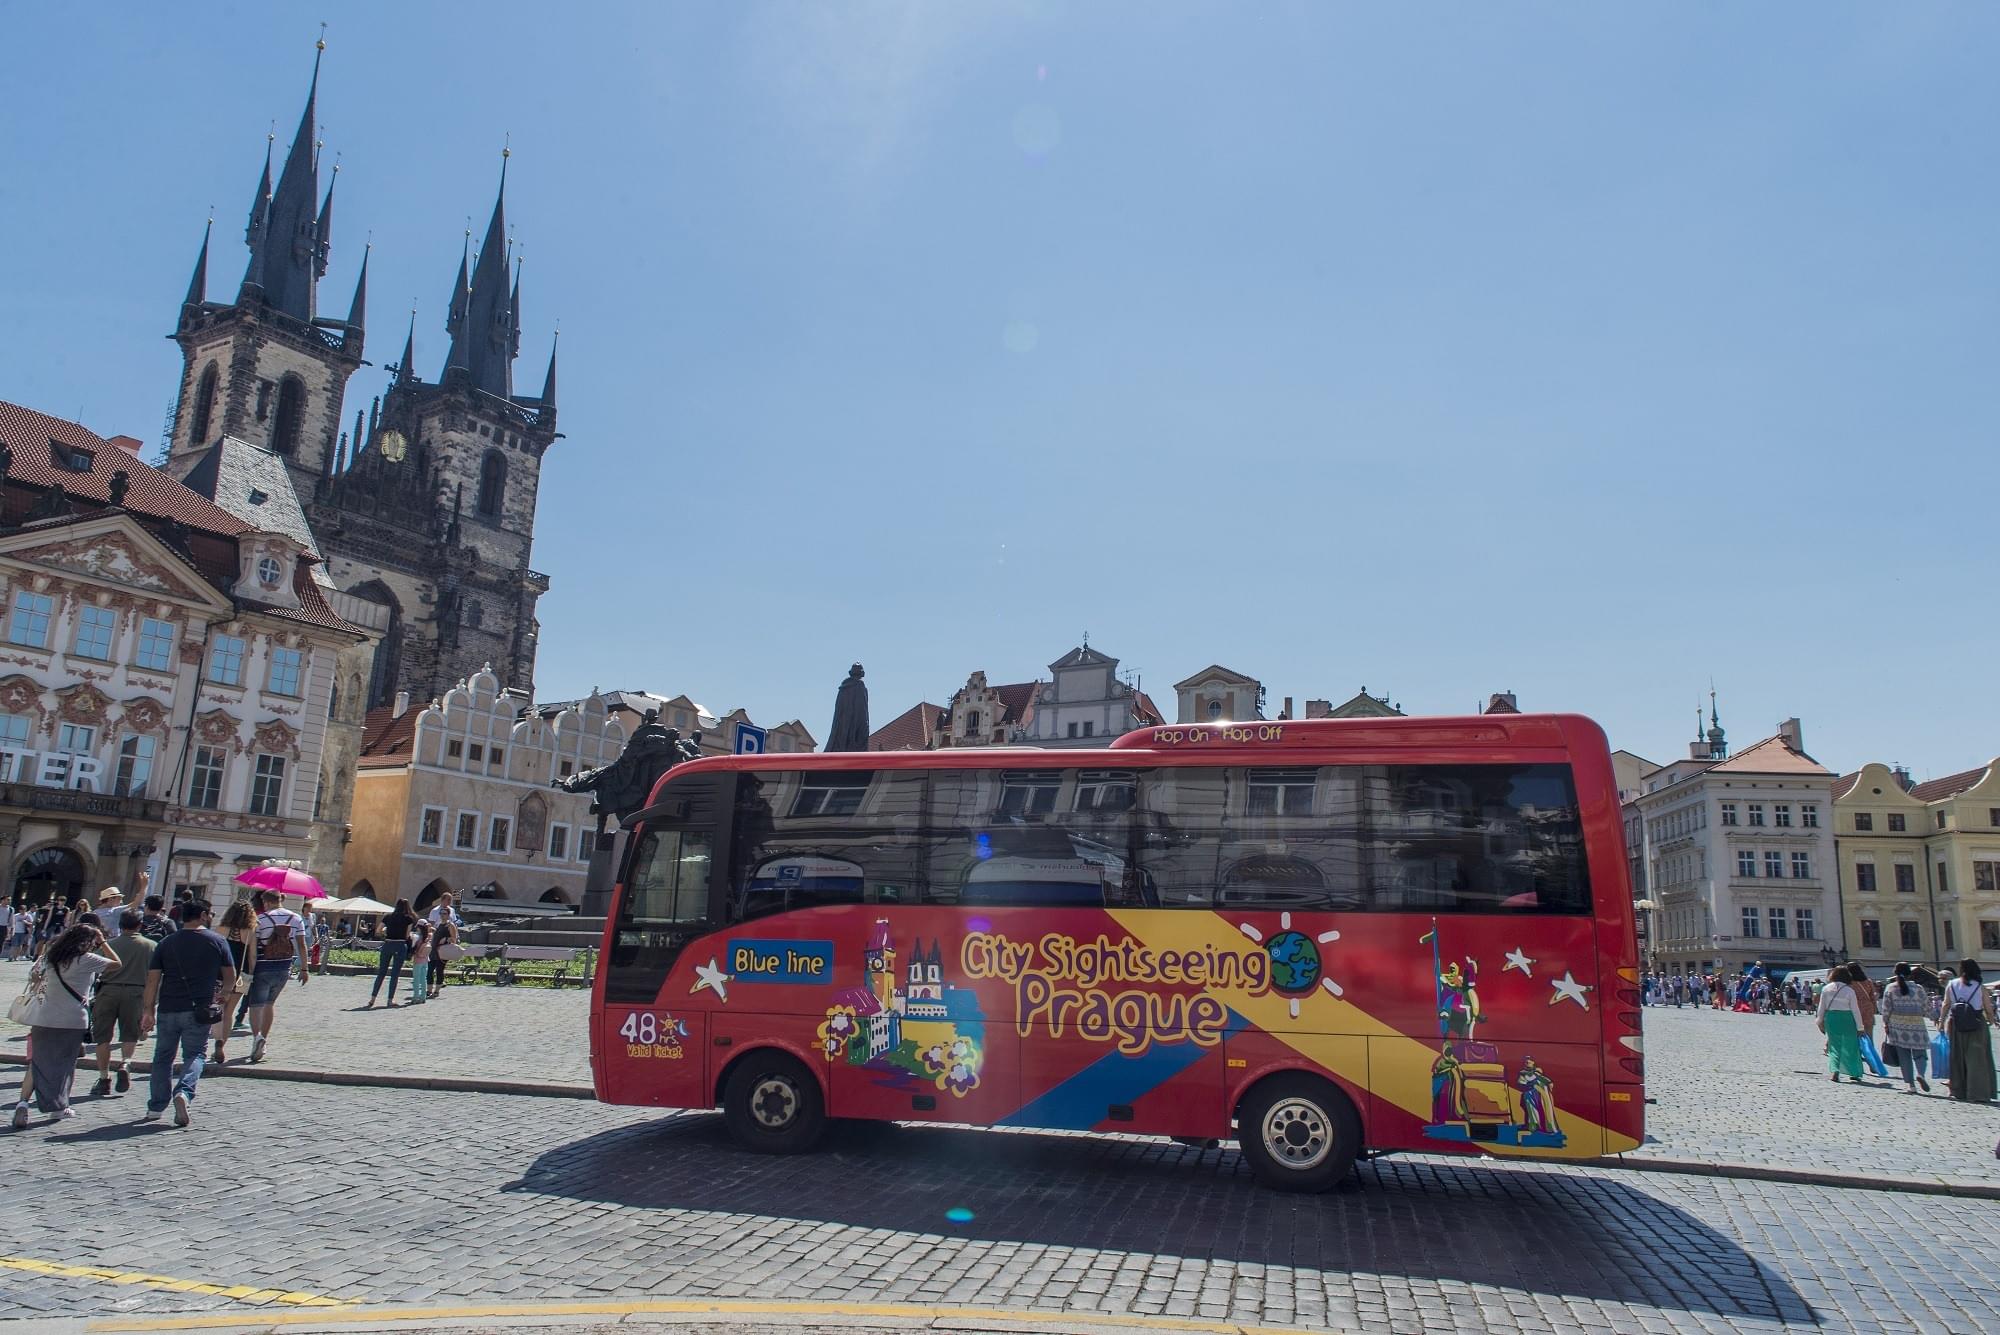 Explore the city of Prague at your own leisure